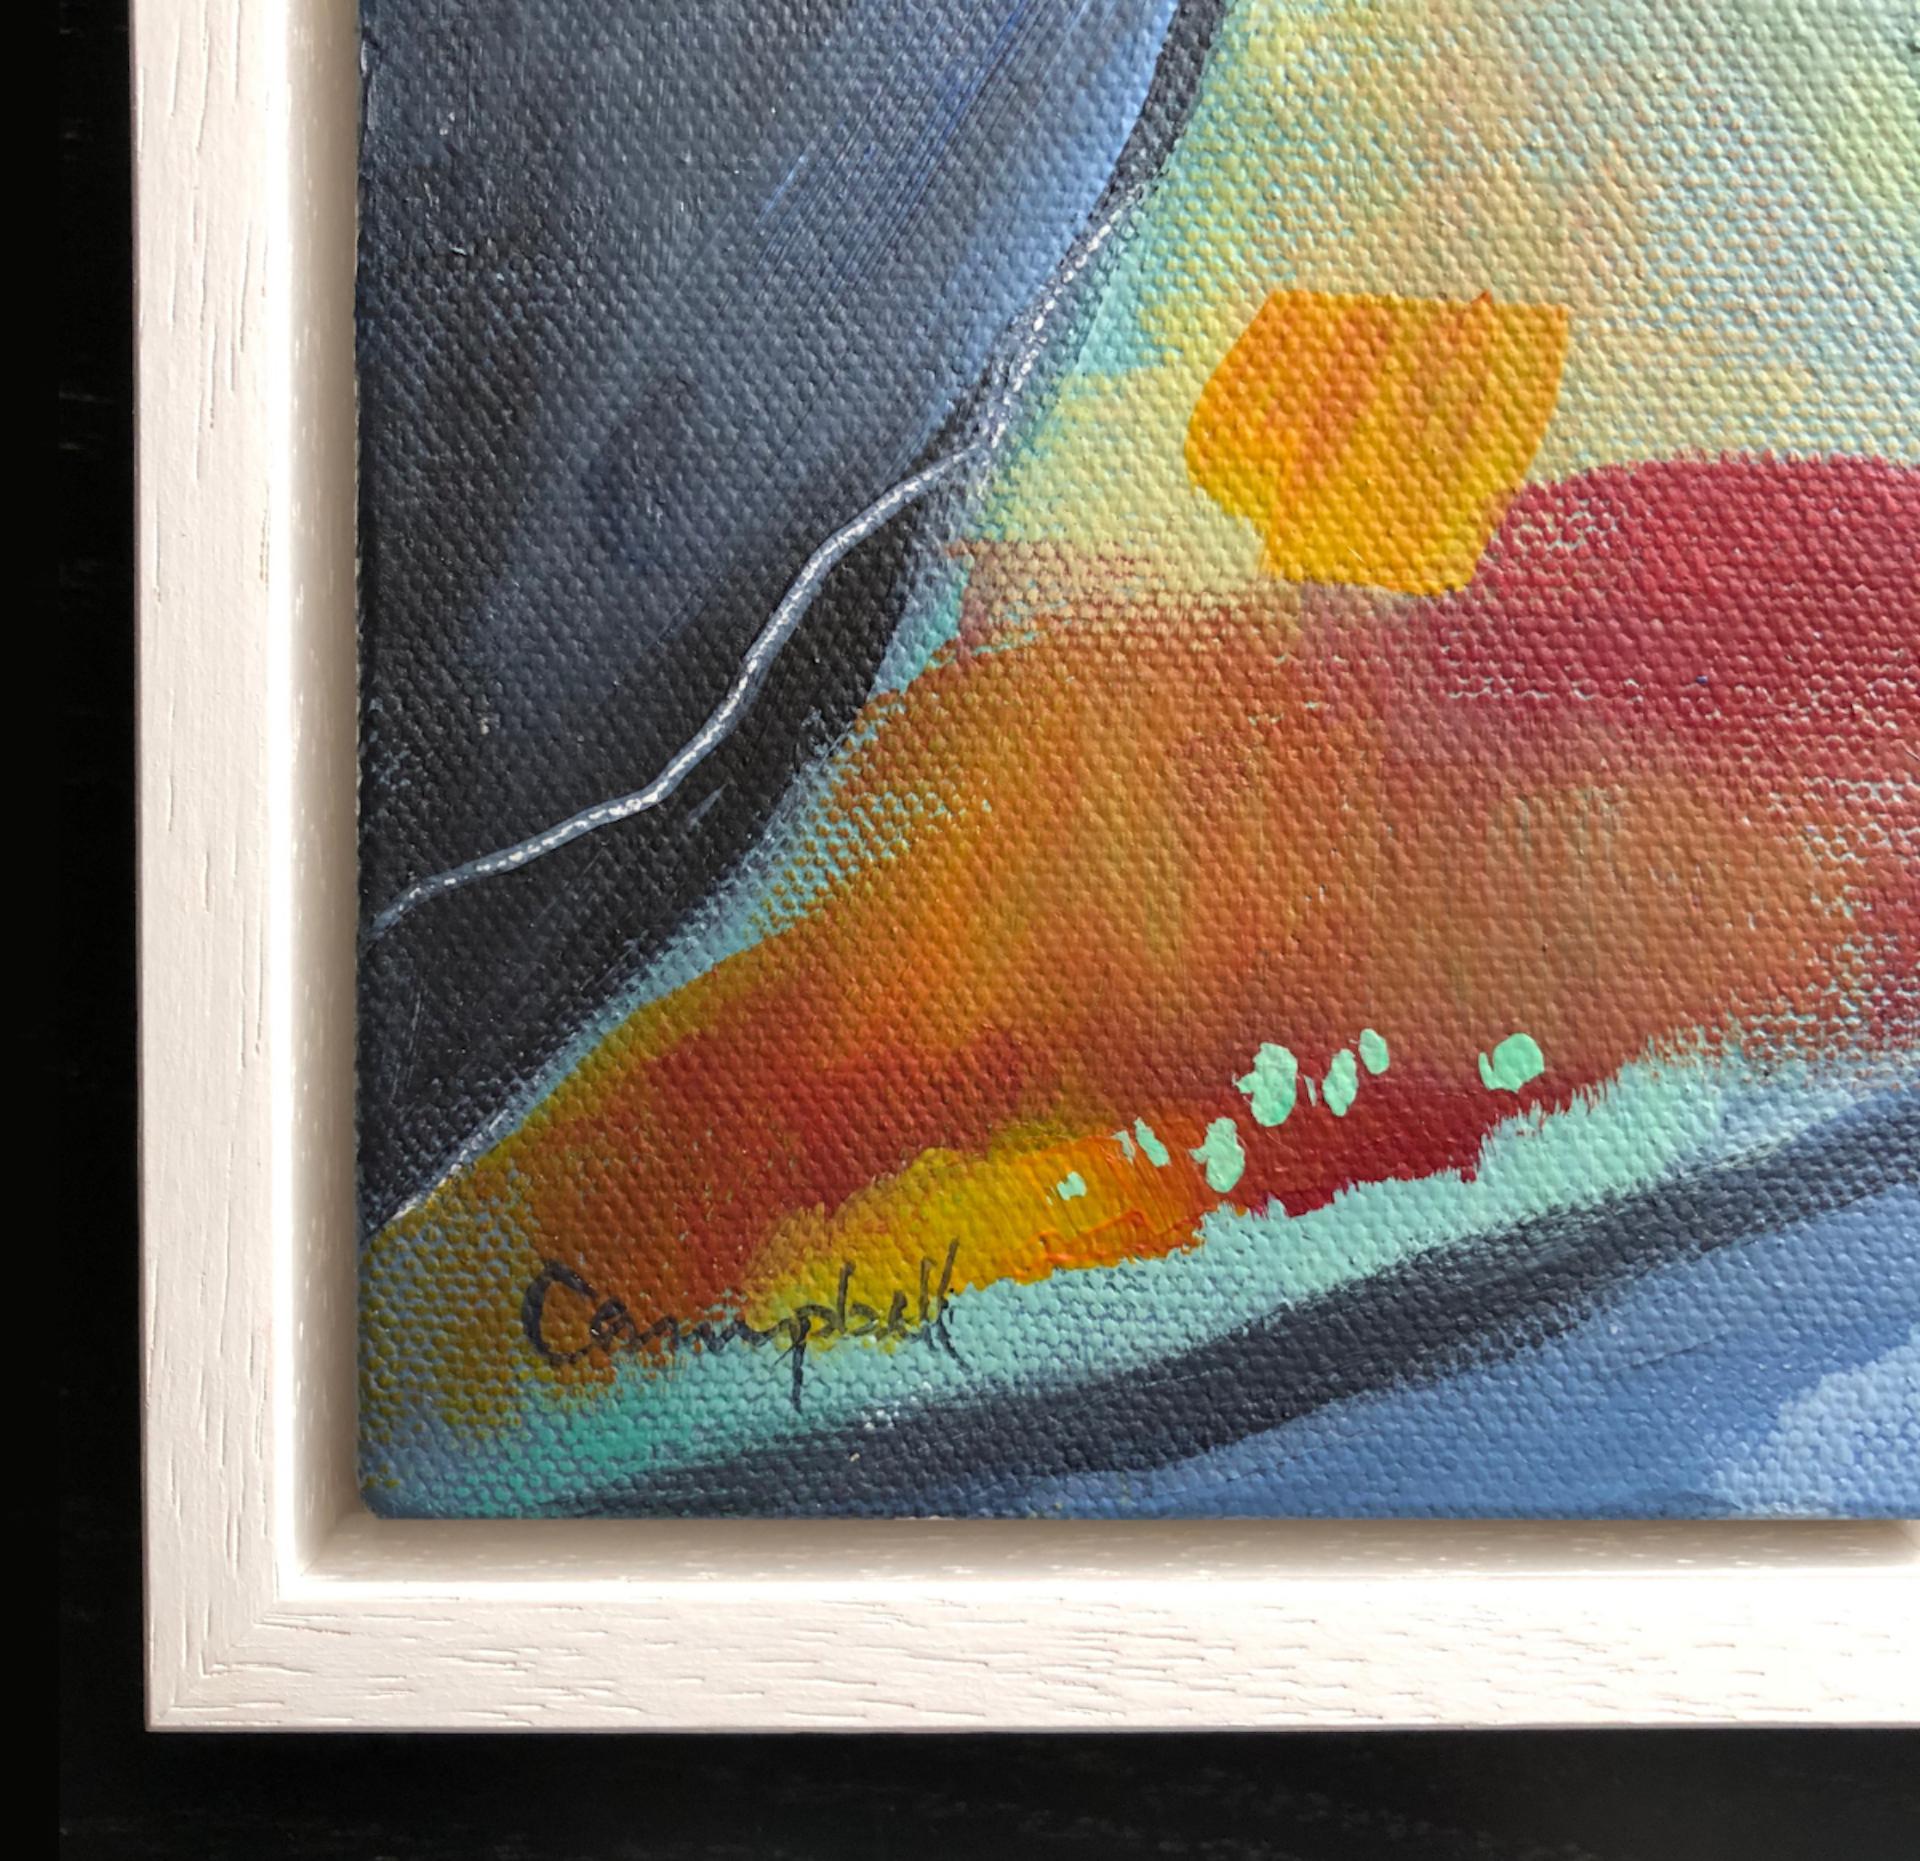 Eleanor Campbell
Midsummer Walk
Contemporary Landscape Painting
Acrylic Paint on Canvas
Size: H 33cm x W 33cm
Sold Framed in a White Box Frame
Please note that insitu images are purely an indication of how a piece may look

Midsummer Walk by Eleanor